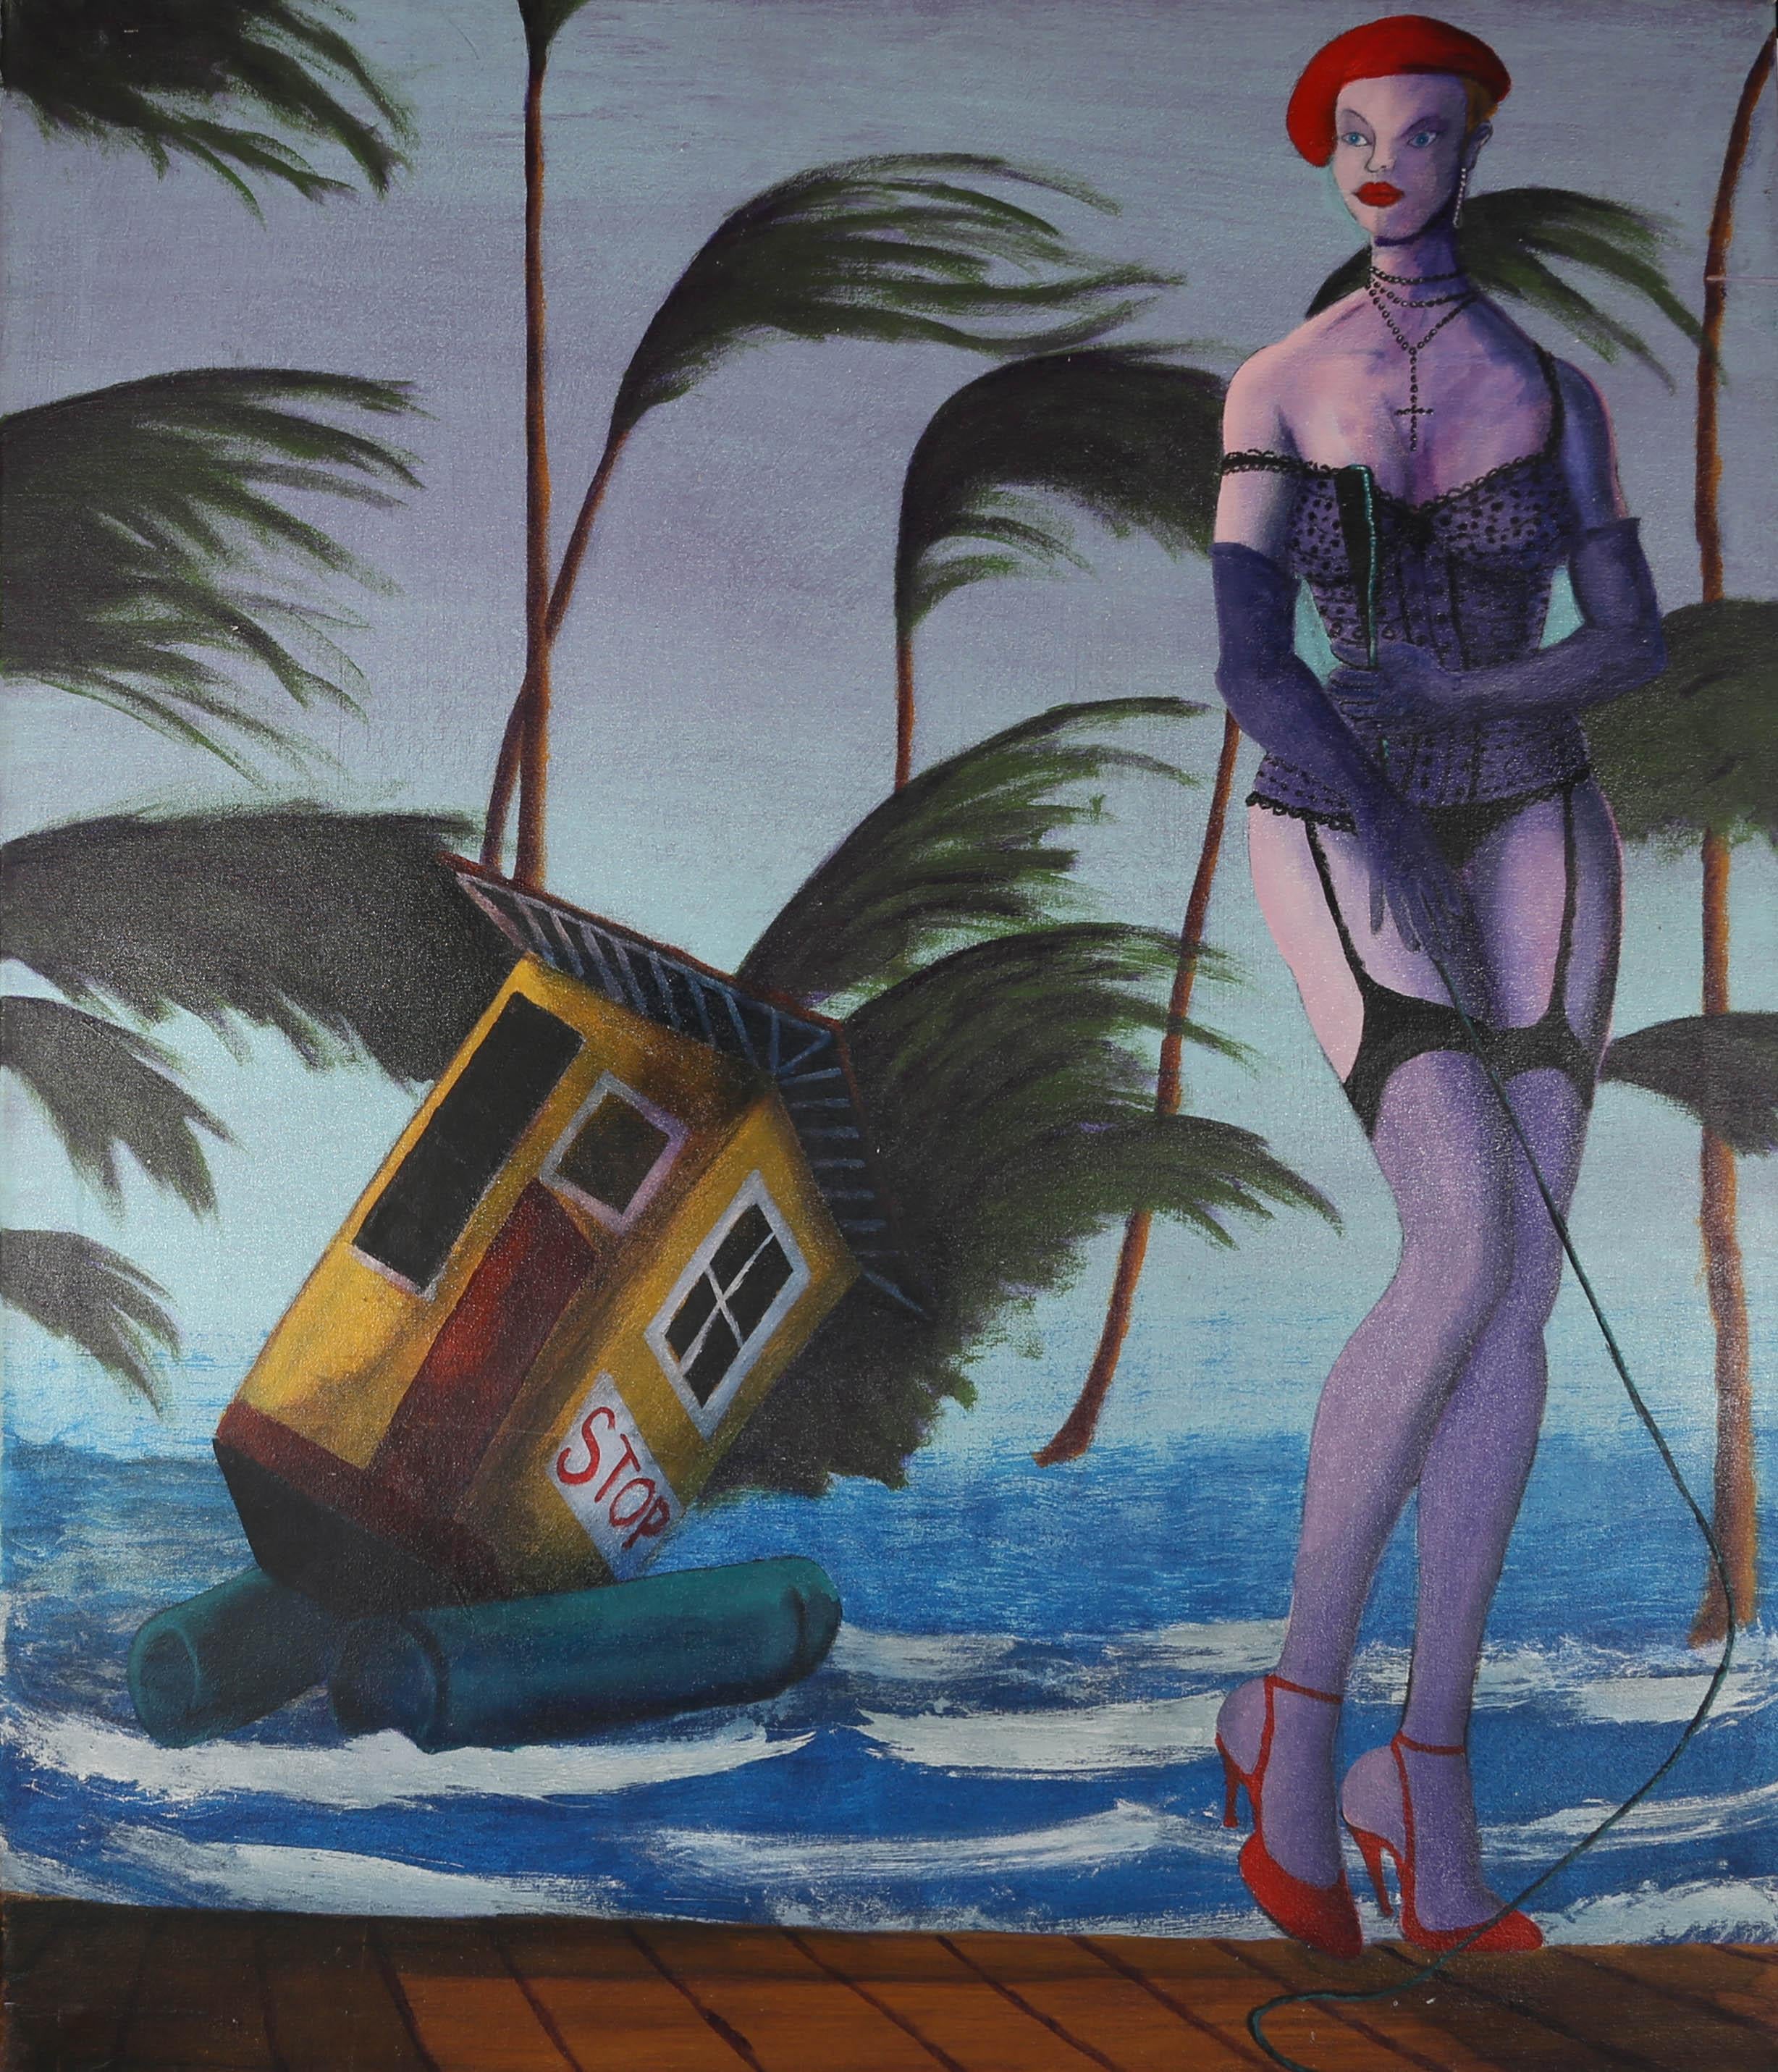 A vibrant and humorous oil scene showing a seductive depiction of the singer, Madonna, standing in front of a backdrop of a raging storm that is blowing palm trees and capsizing a bright yellow beach hut. The artist has signed, dated and inscribed